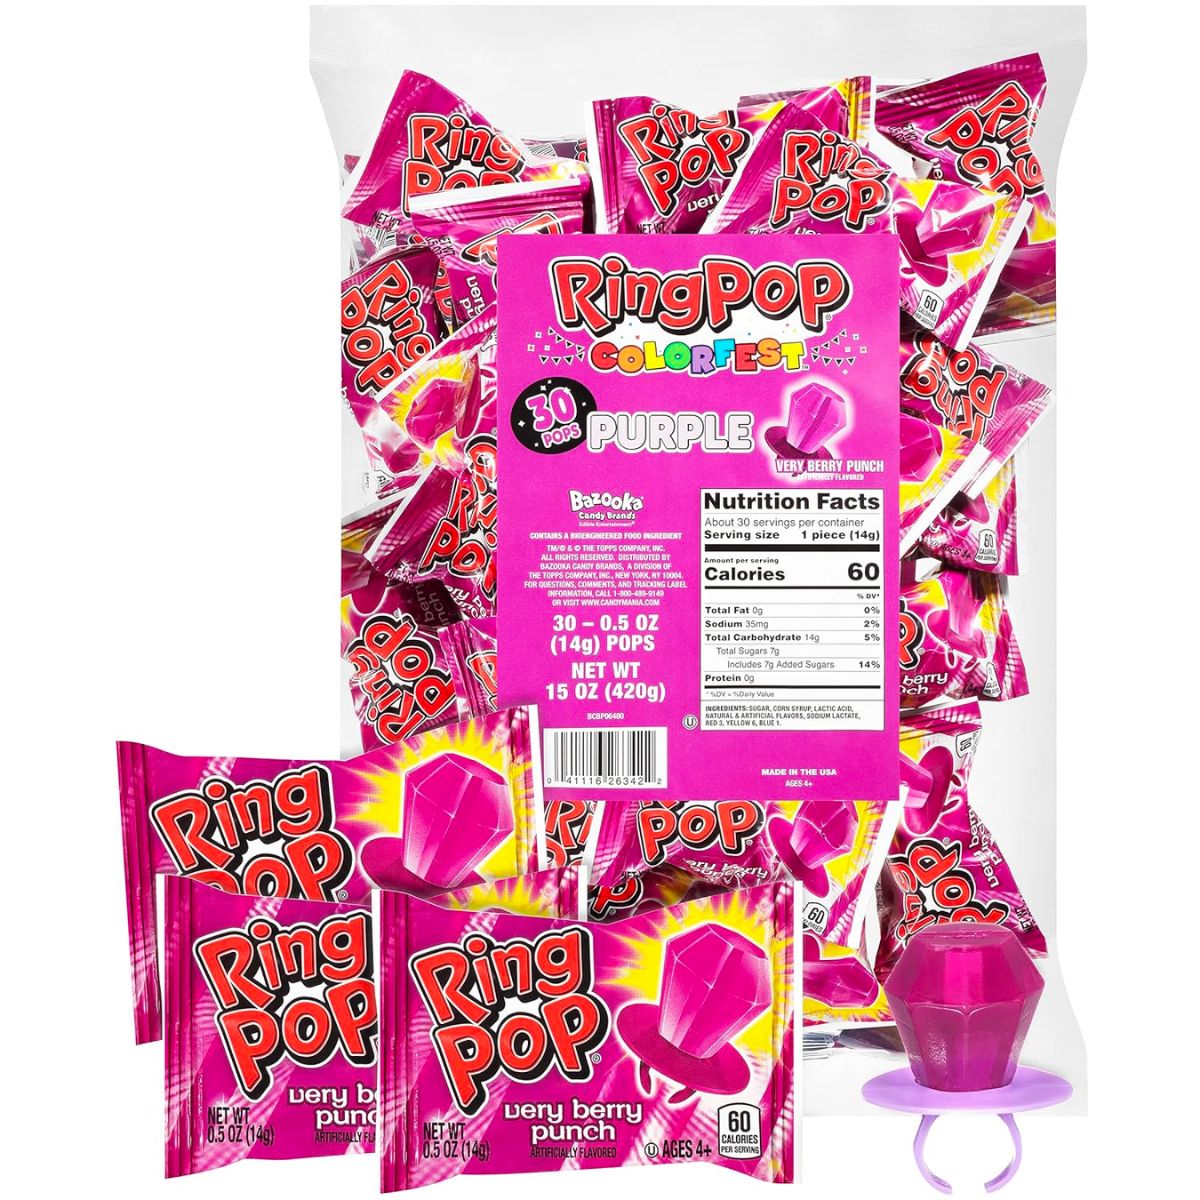 Purple berry punch ring pop 30 count bag stock image